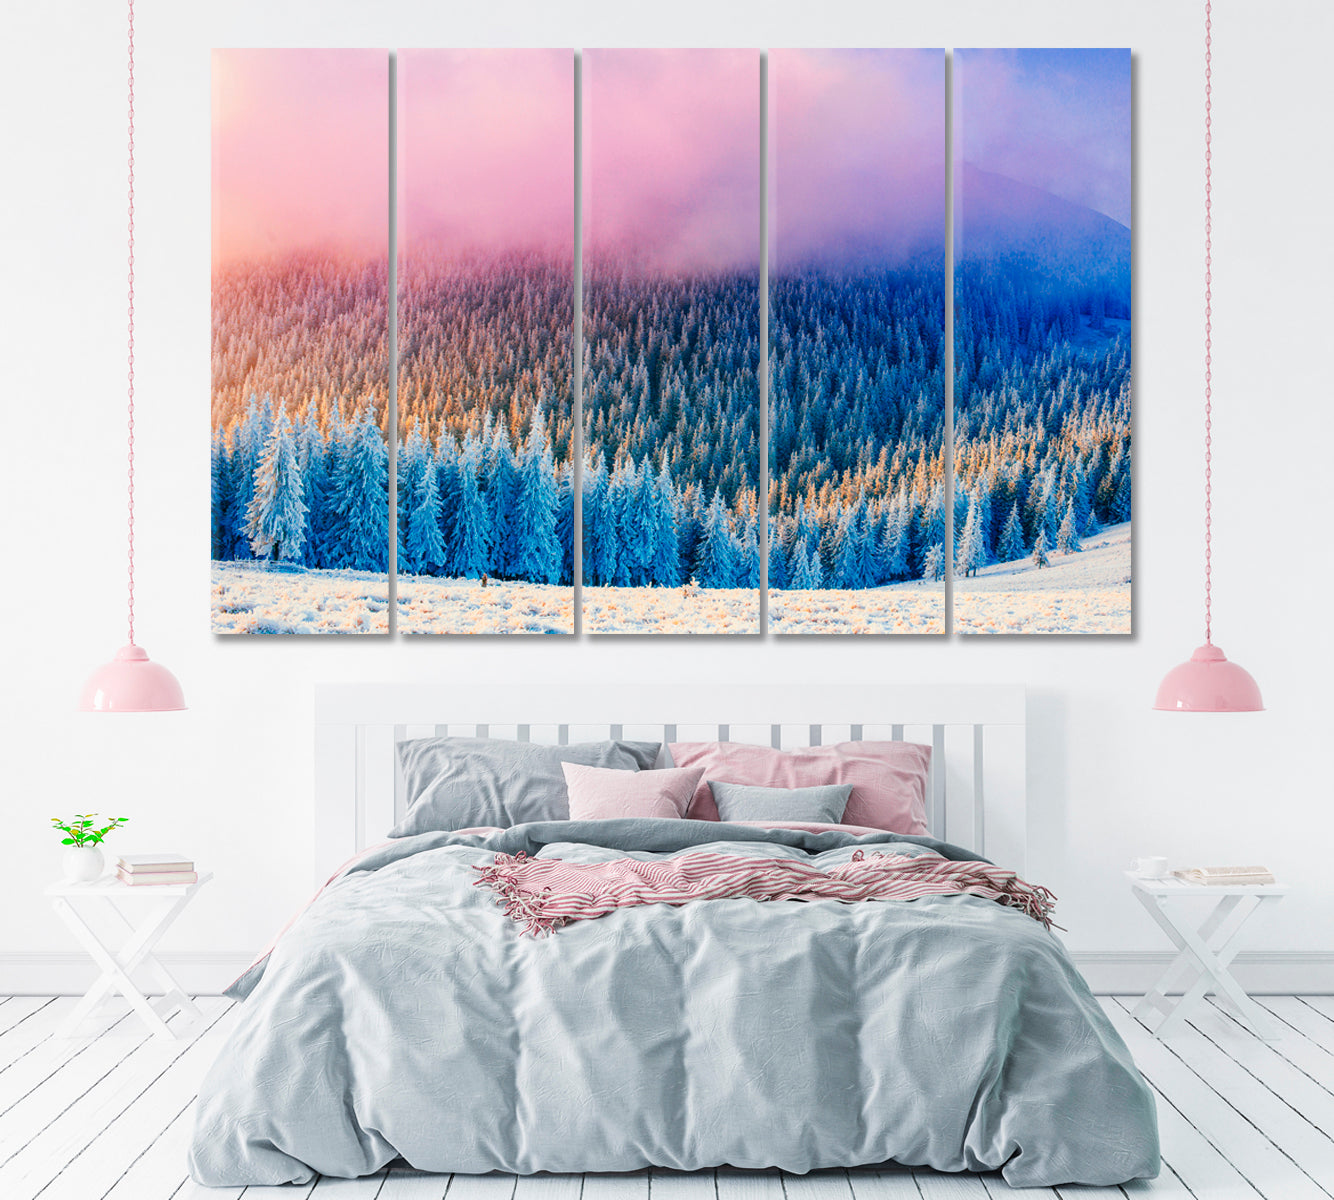 Winter Forest in Austria Alps Canvas Print ArtLexy 5 Panels 36"x24" inches 